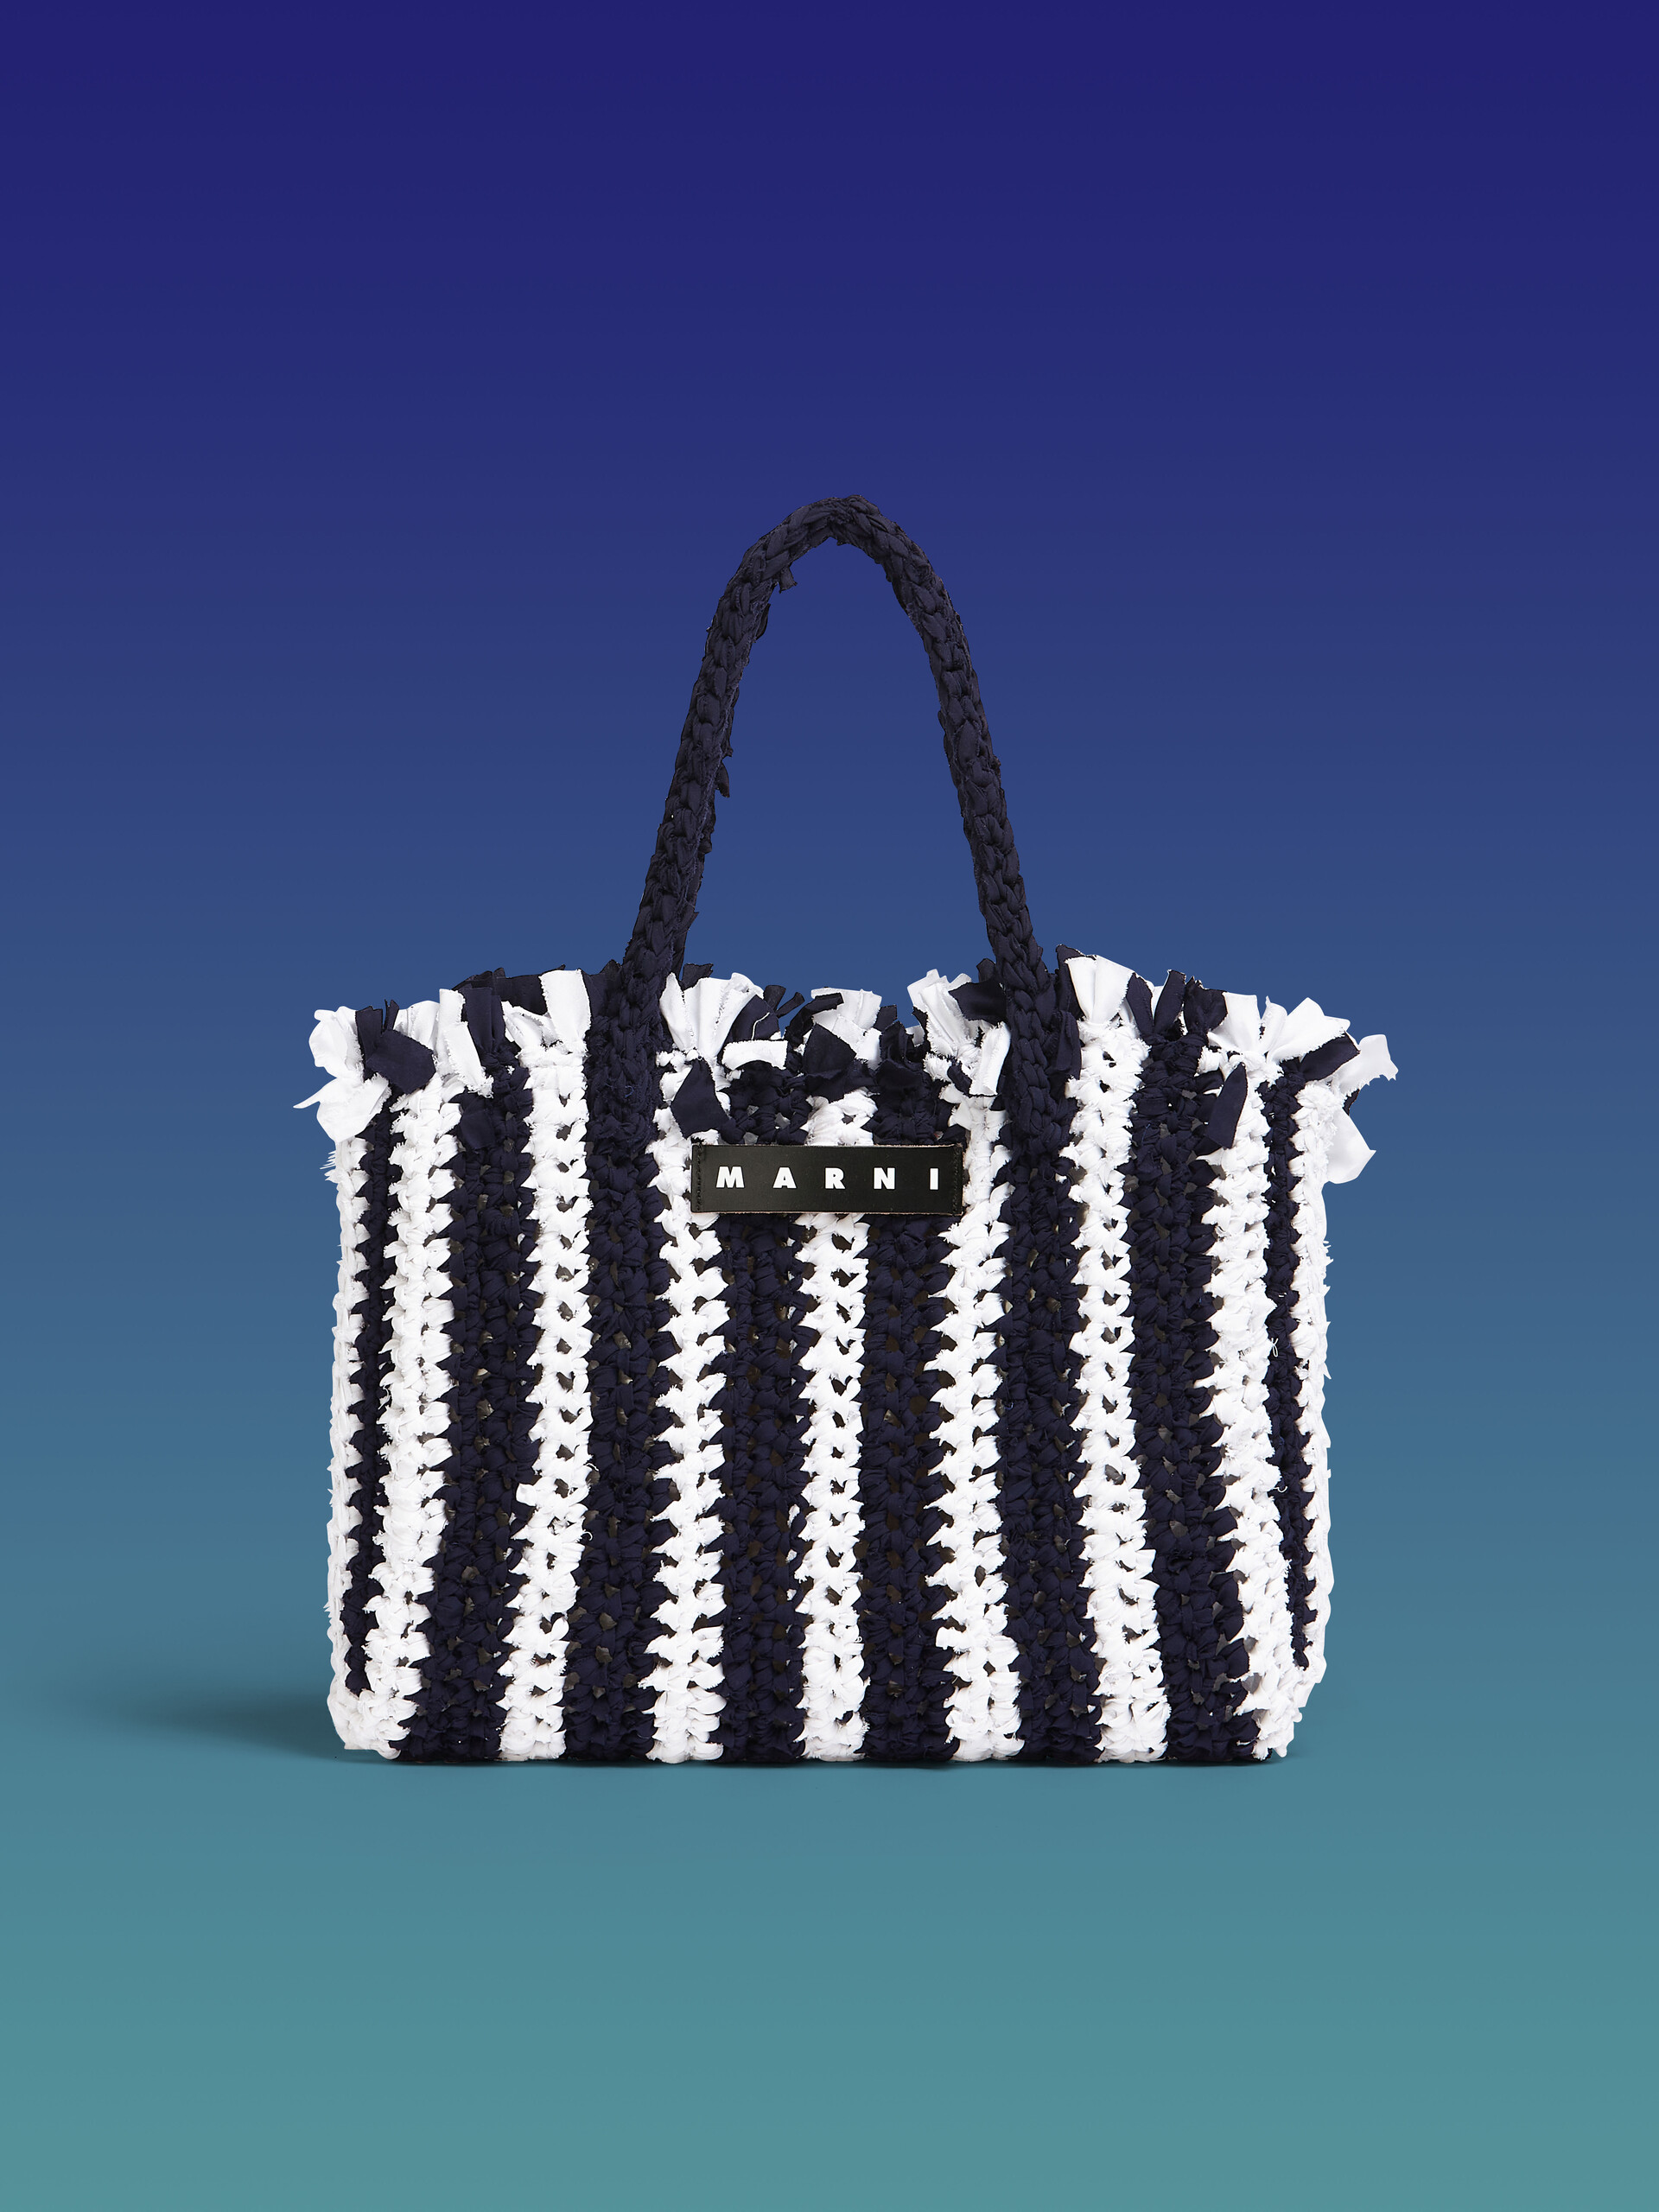 MARNI MARKET bag in white and blue cotton - Bags - Image 1